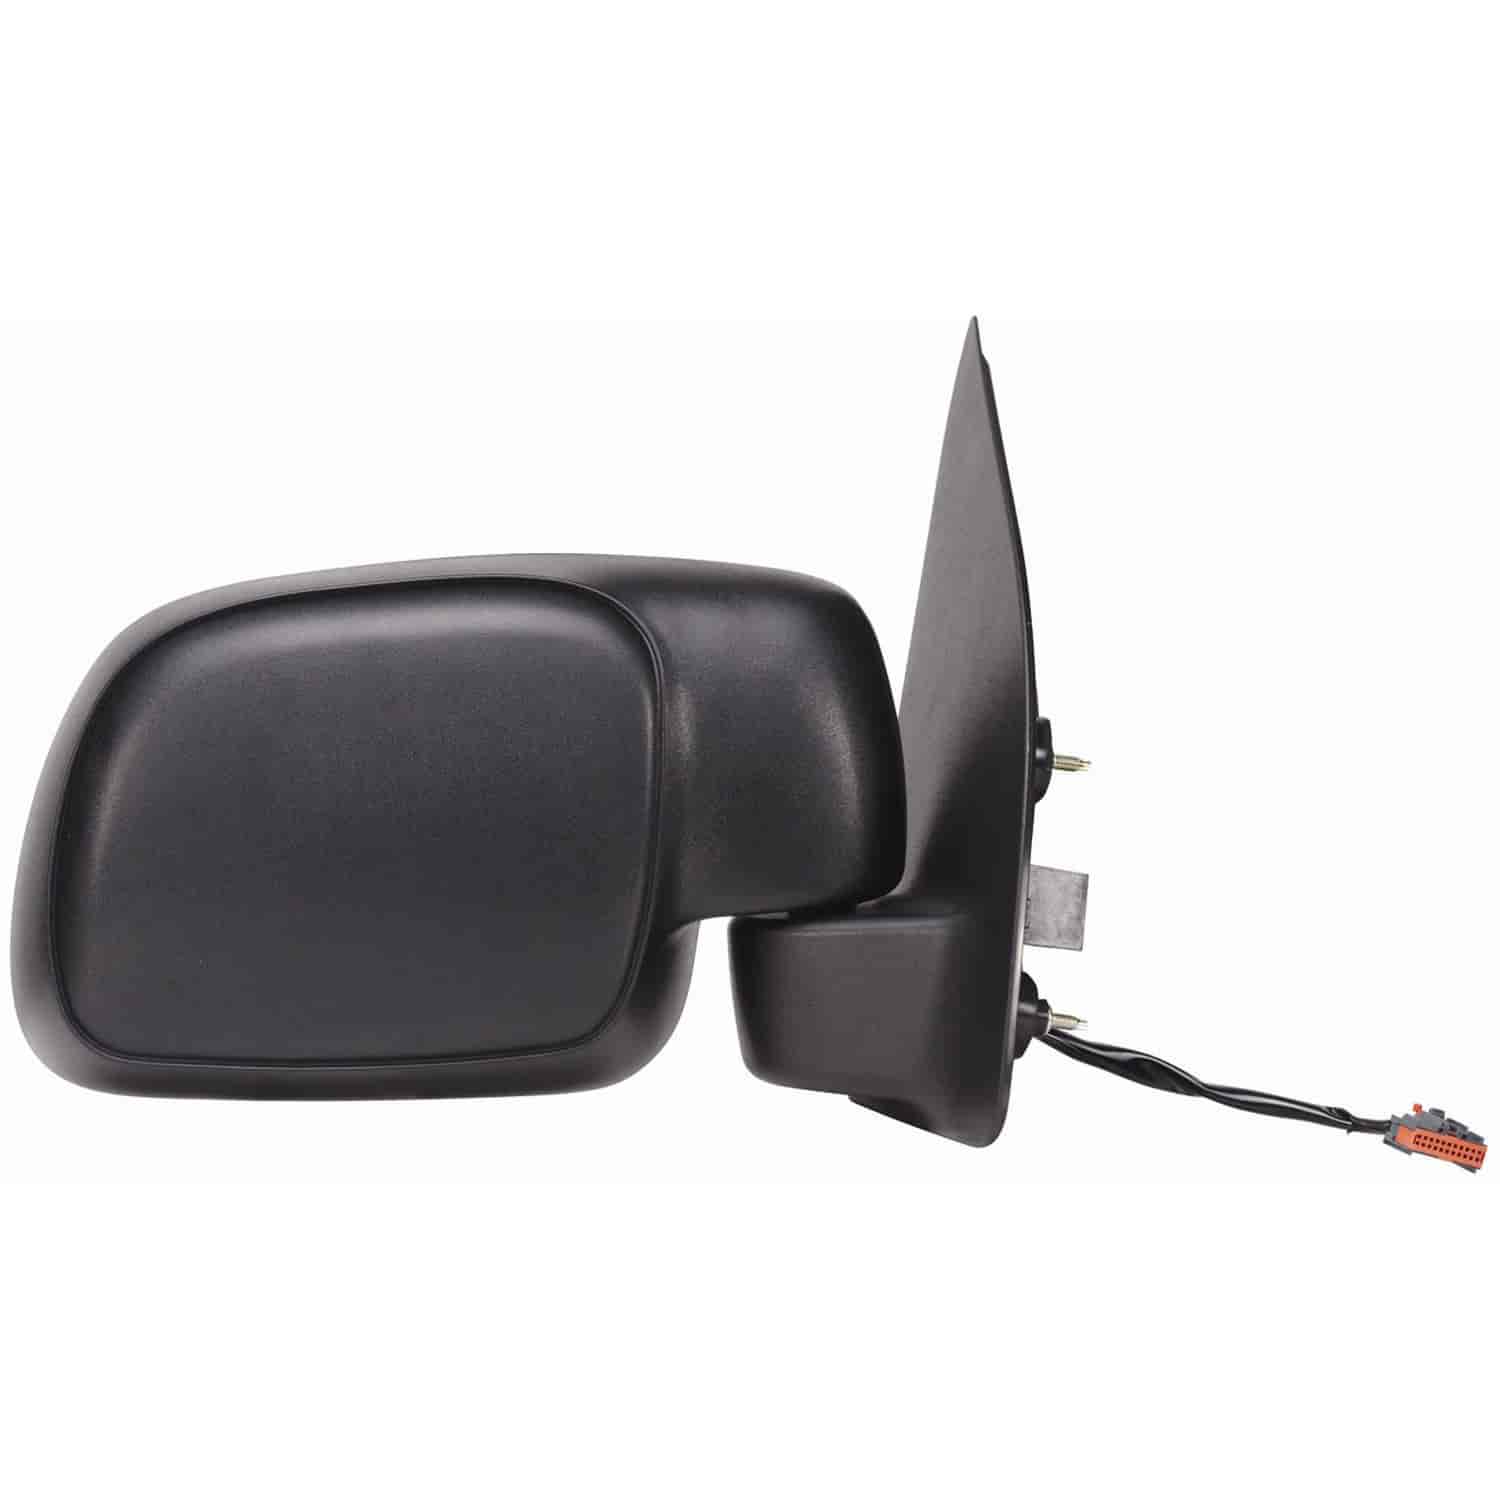 OEM Style Replacement mirror for 01-05 Ford Excursion passenger side mirror tested to fit and functi